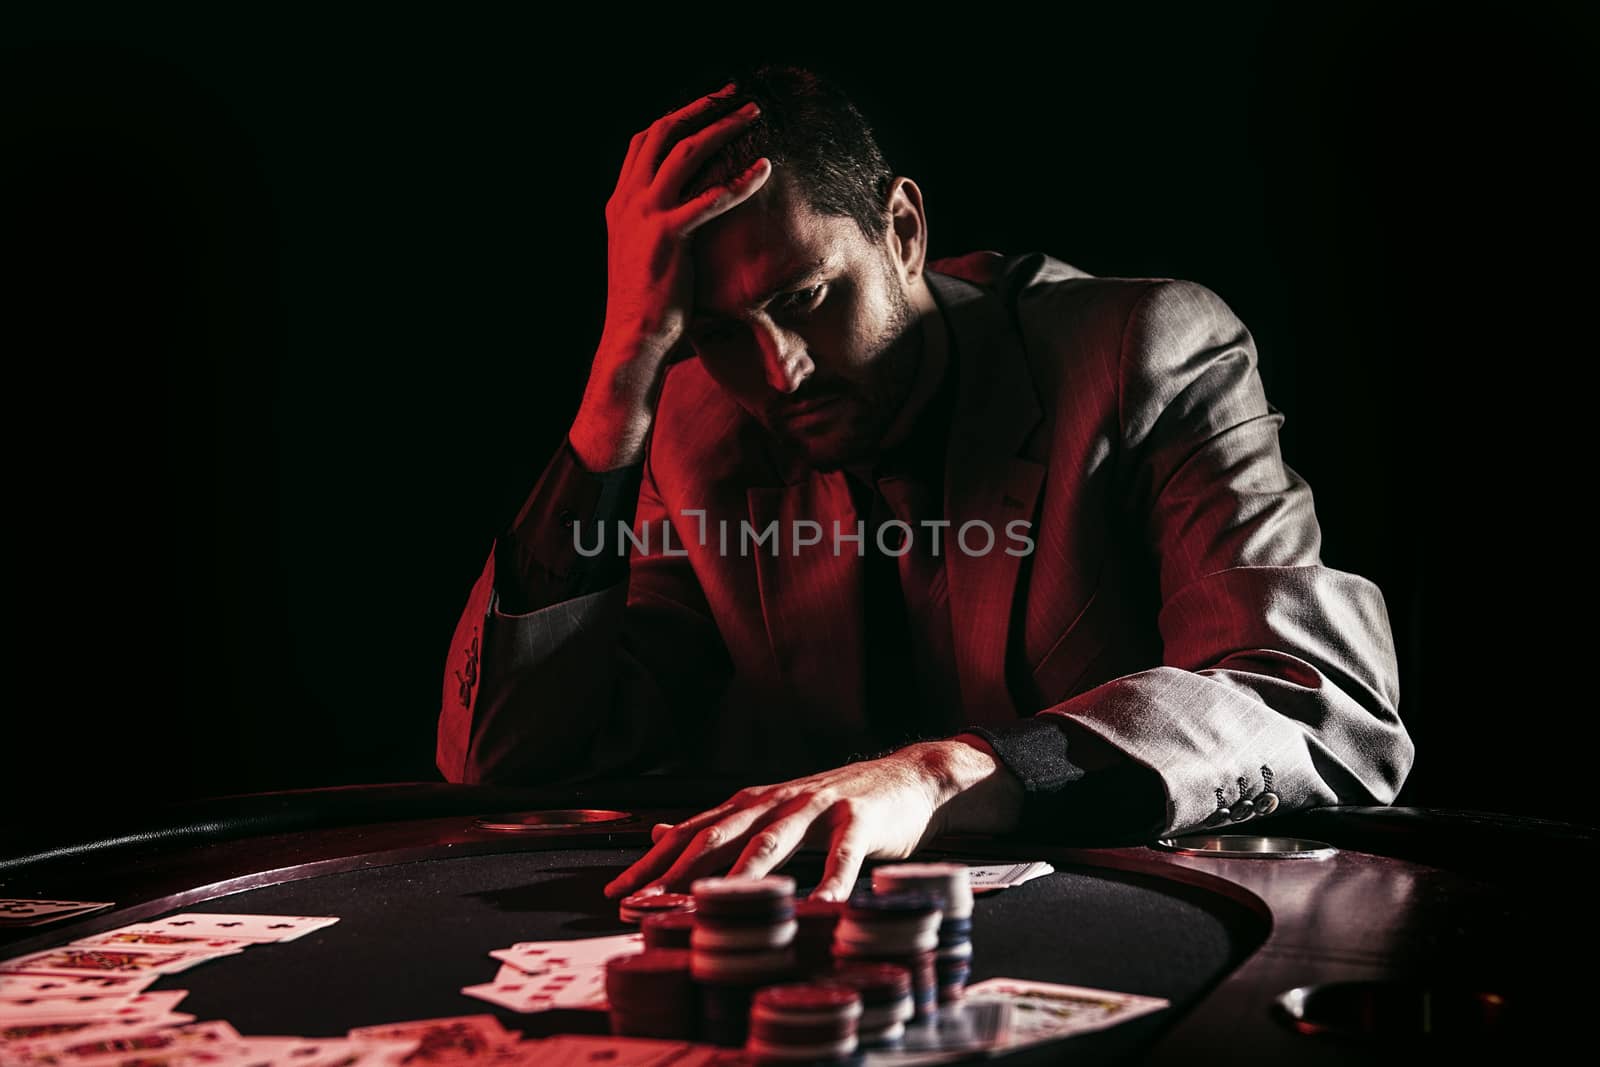 Concept: A high stakes poker player is frustrated and emotional over loosing and finding it hard to contain his emotions. Cinematic portrait.